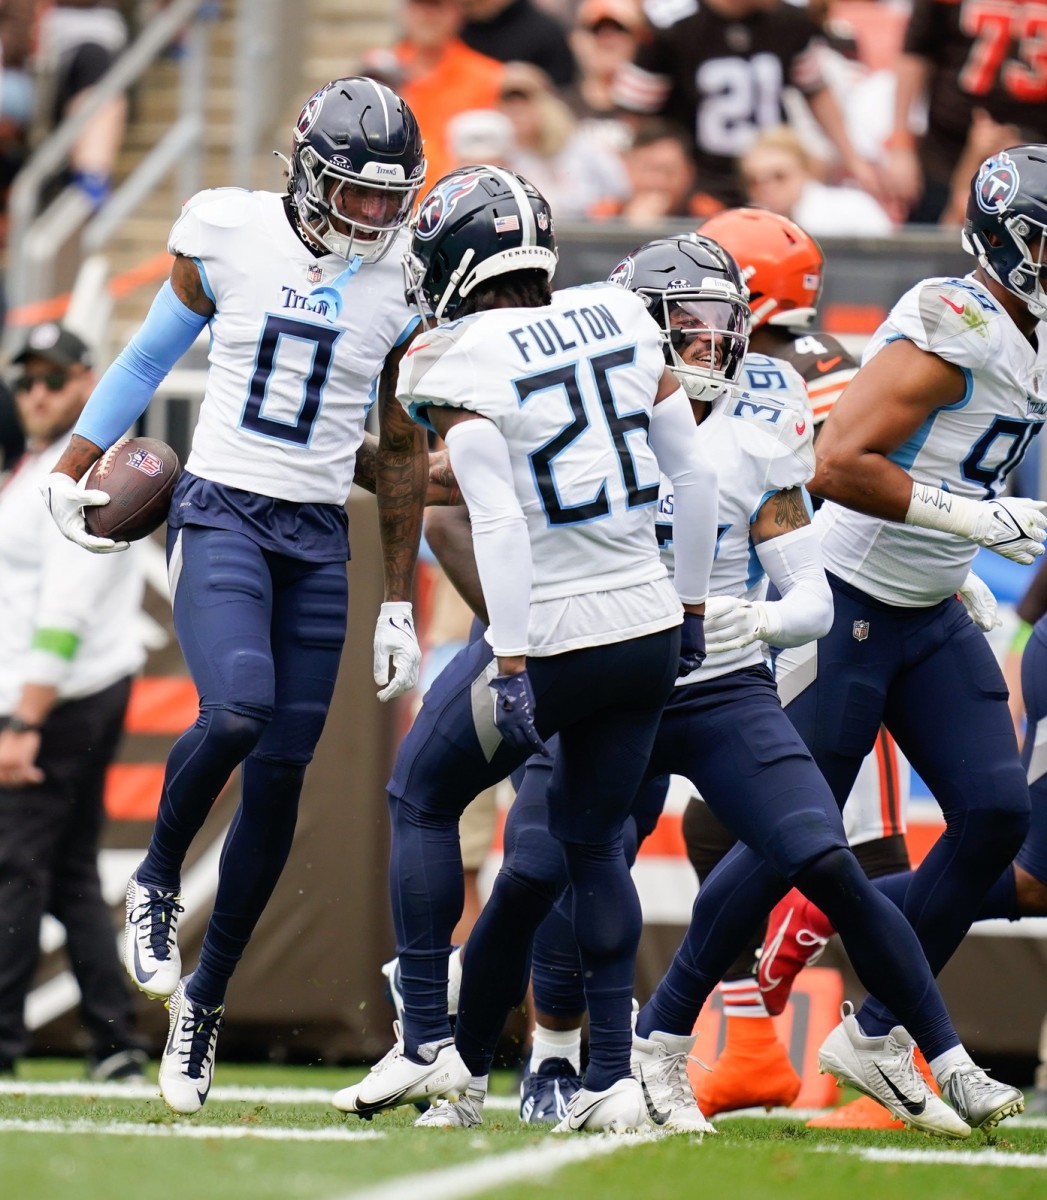 Tennessee Titans cornerback Sean Murphy-Bunting (0) recovers a Cleveland Browns fumble during the first quarter in Cleveland, Ohio.